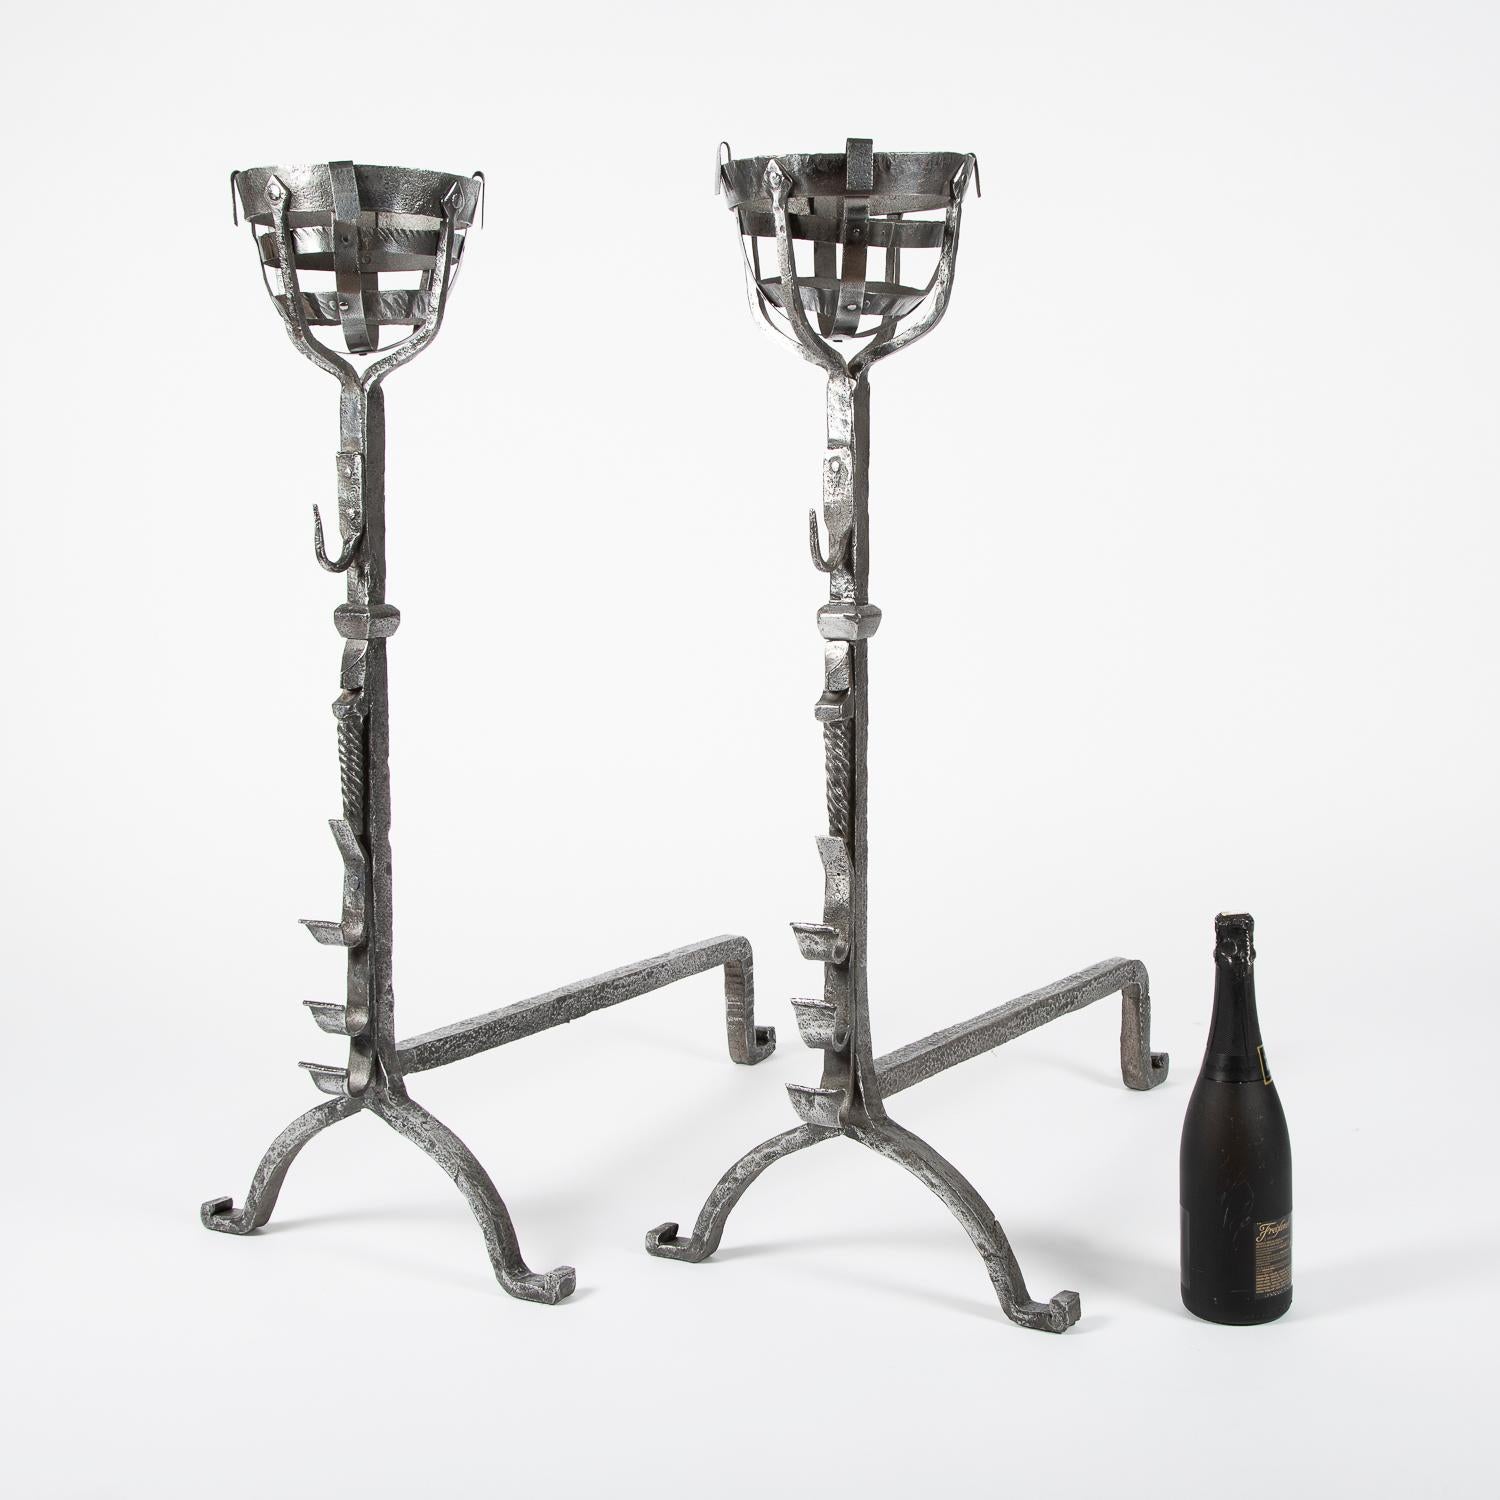 A pair of wrought iron cresset fire dogs, English, circa 1800.

Cresset tops used for the warming of flasks of wine, and the fronts each have three rests for fire tools or roasting spits.